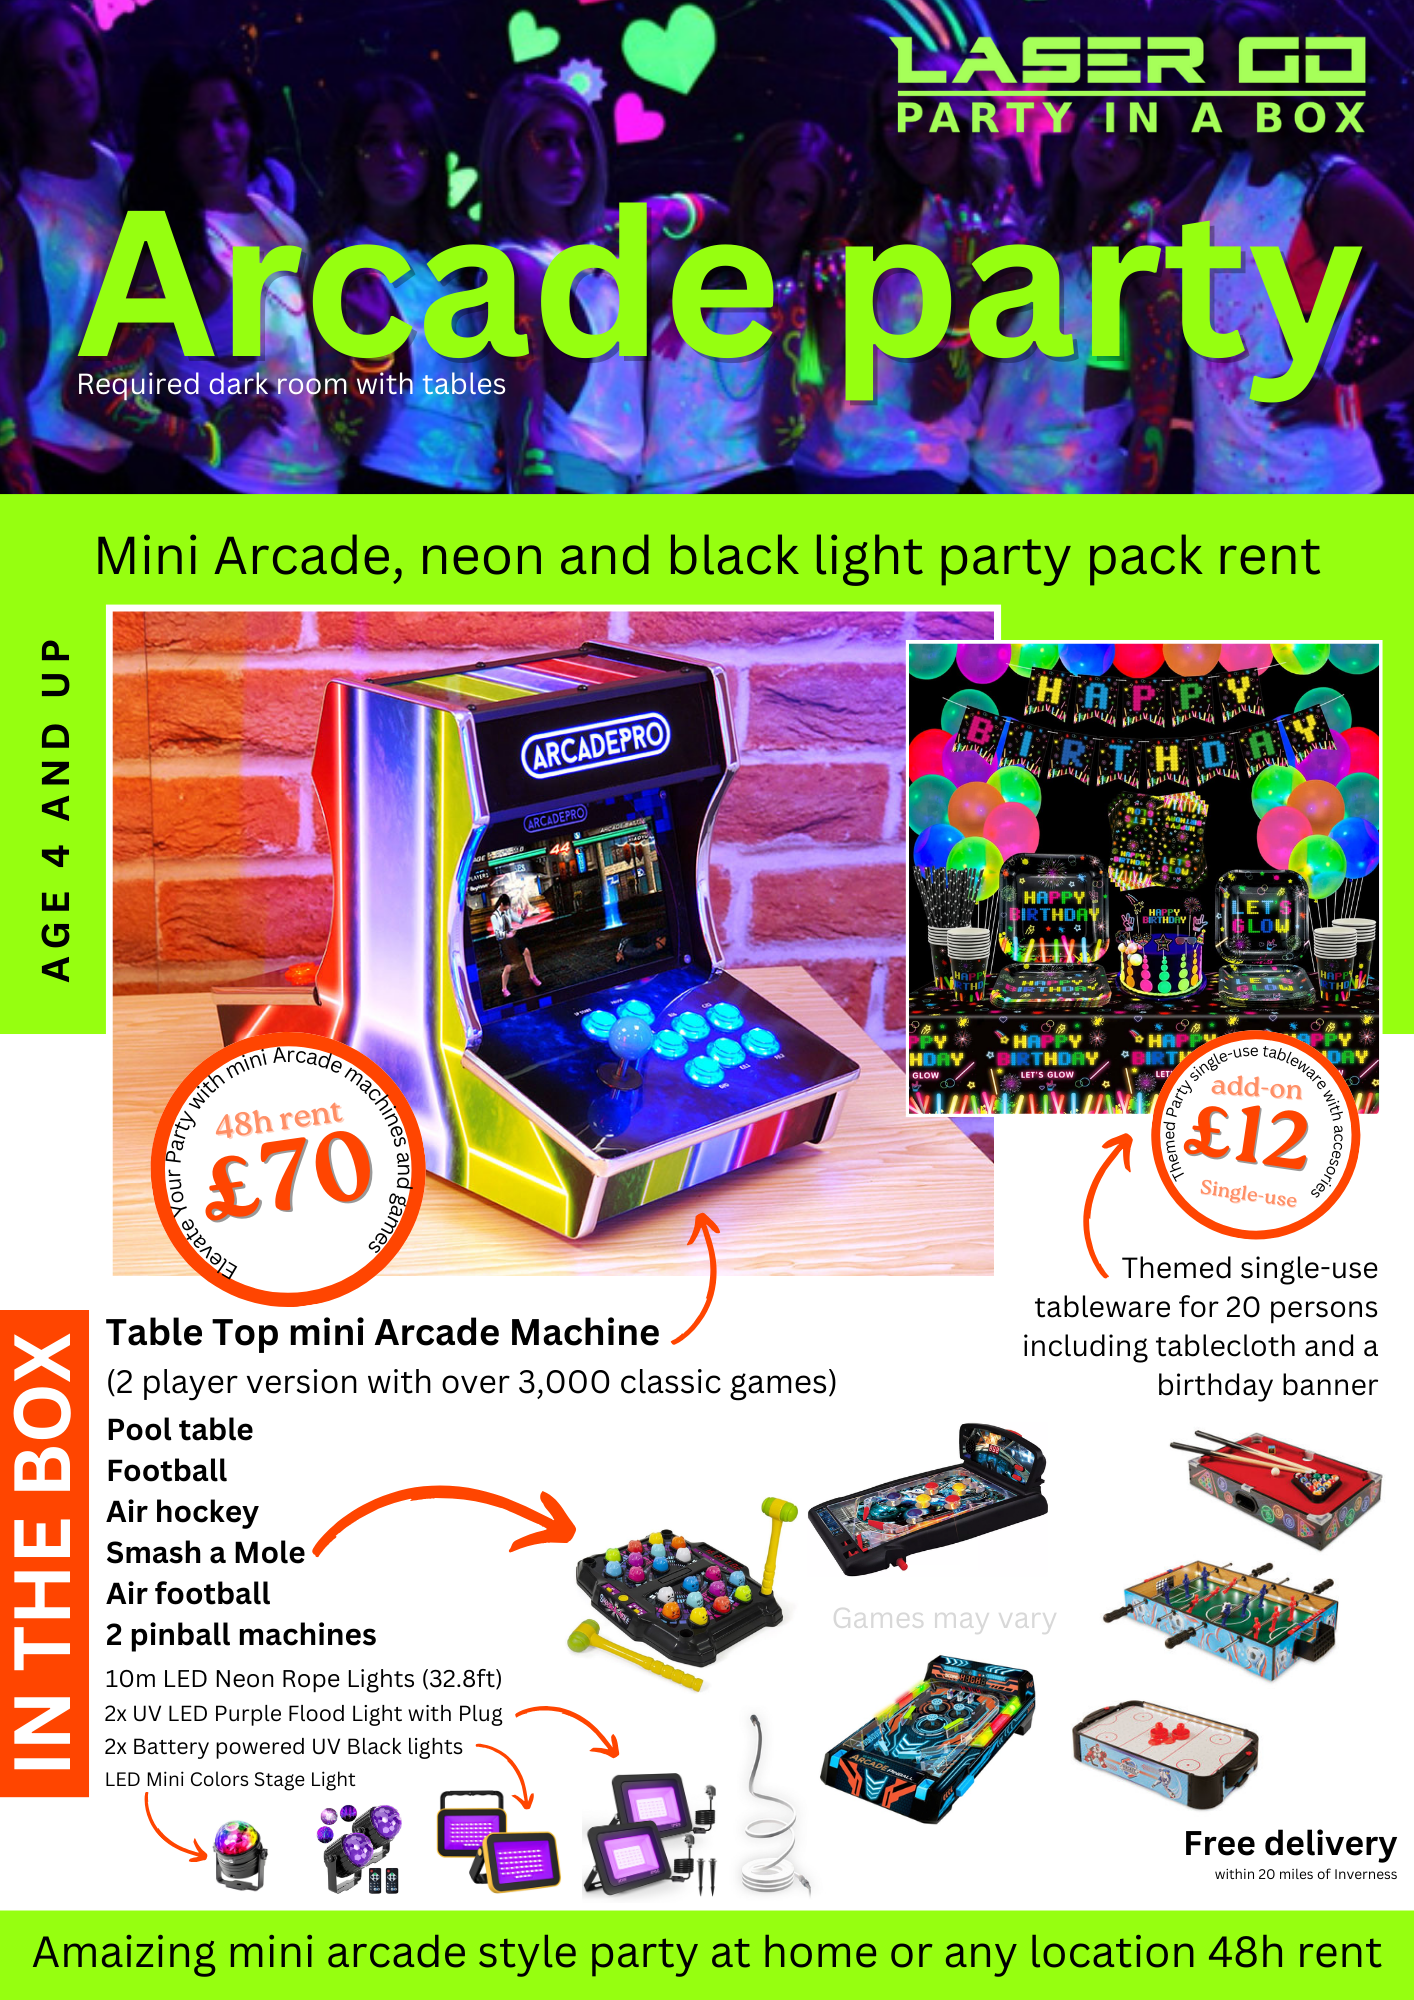 Mini Arcade party in blacklight style - Party in a box hire